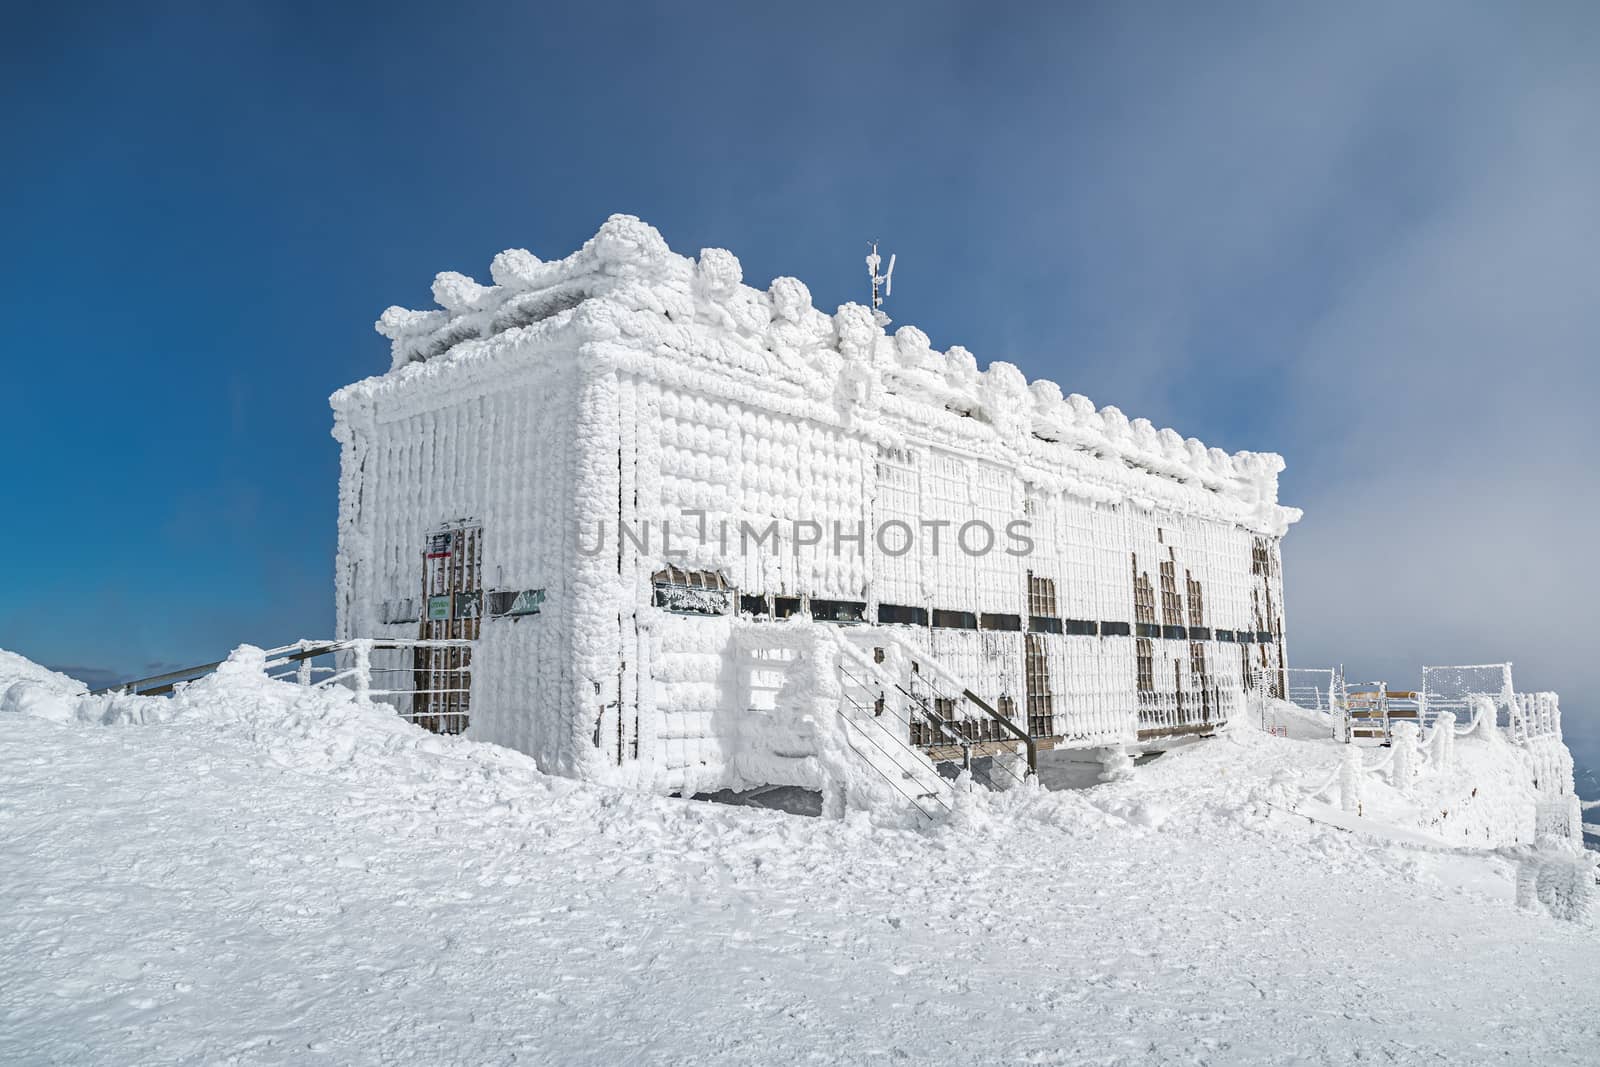 Post office called Postovna on top of Snezka covered with frost. The peak of the Snezka Mountain in winter in the Krkonose Mountains.